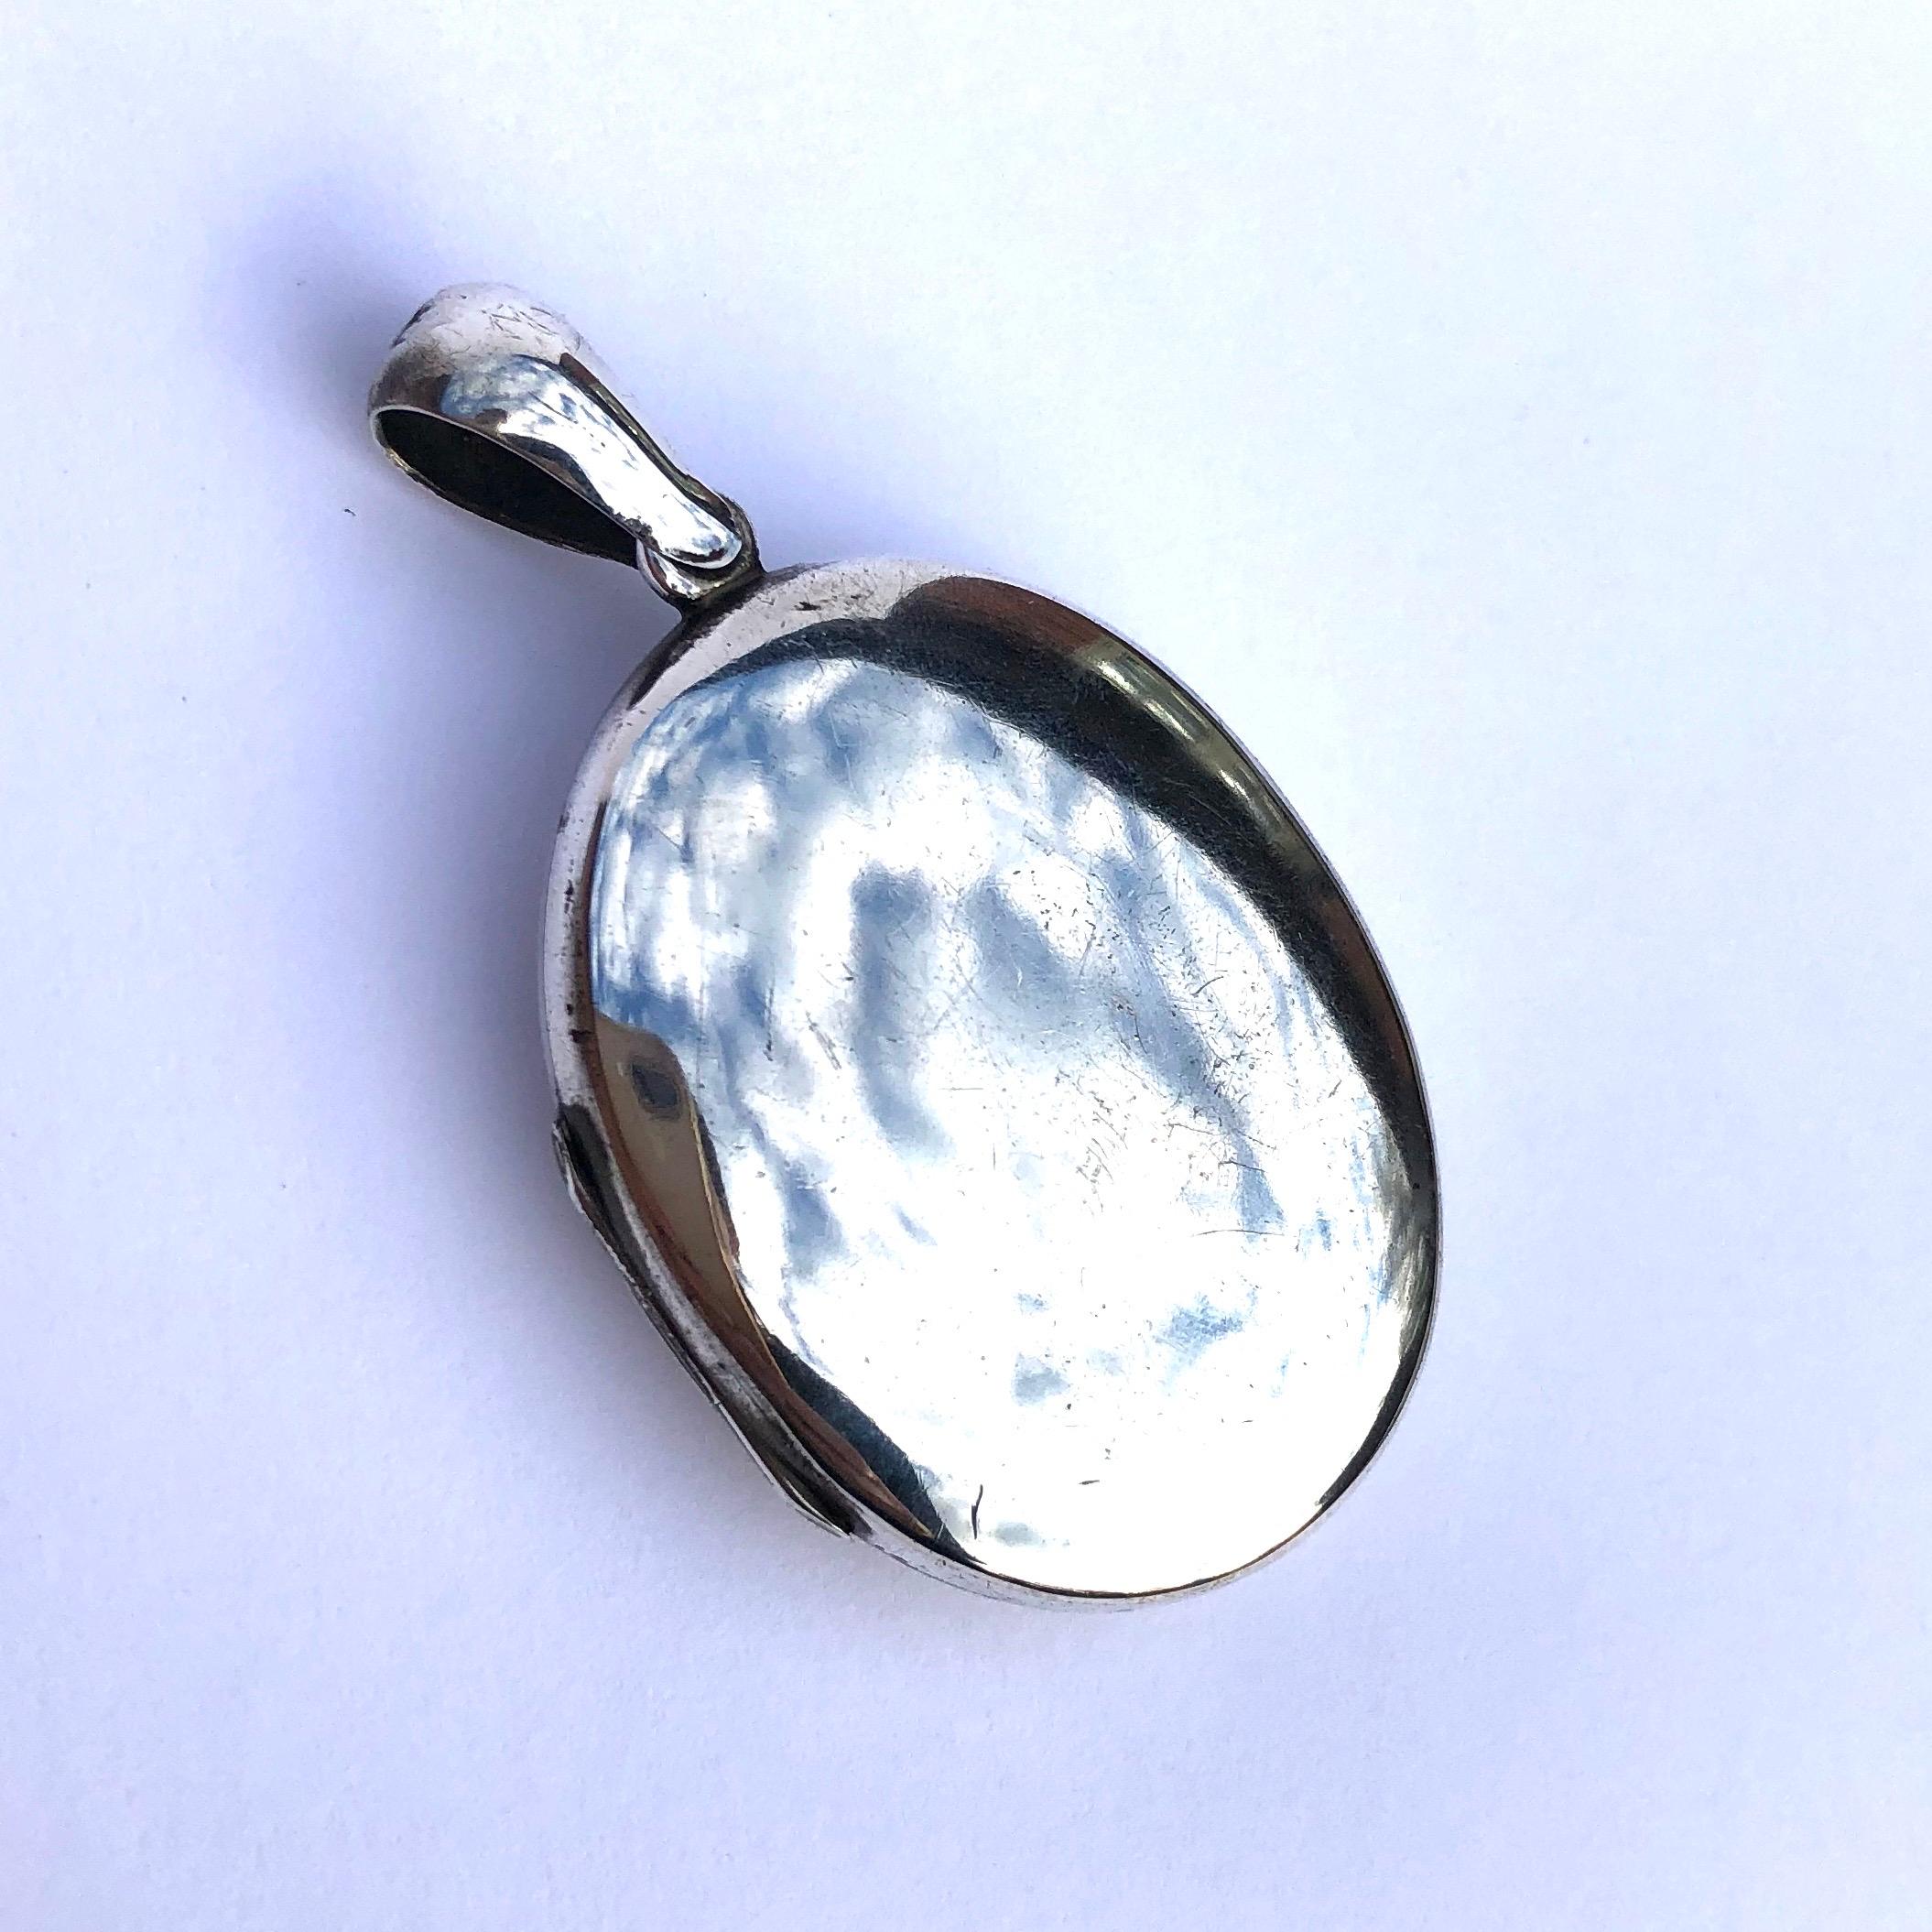 Exquisitely engraved on the front of this locket are the initials PB. On he inside of the locket there is still a glazed panel which can be used. 

Dimensions Inc Loop: 55x 32mm 

Weight: 15.1g